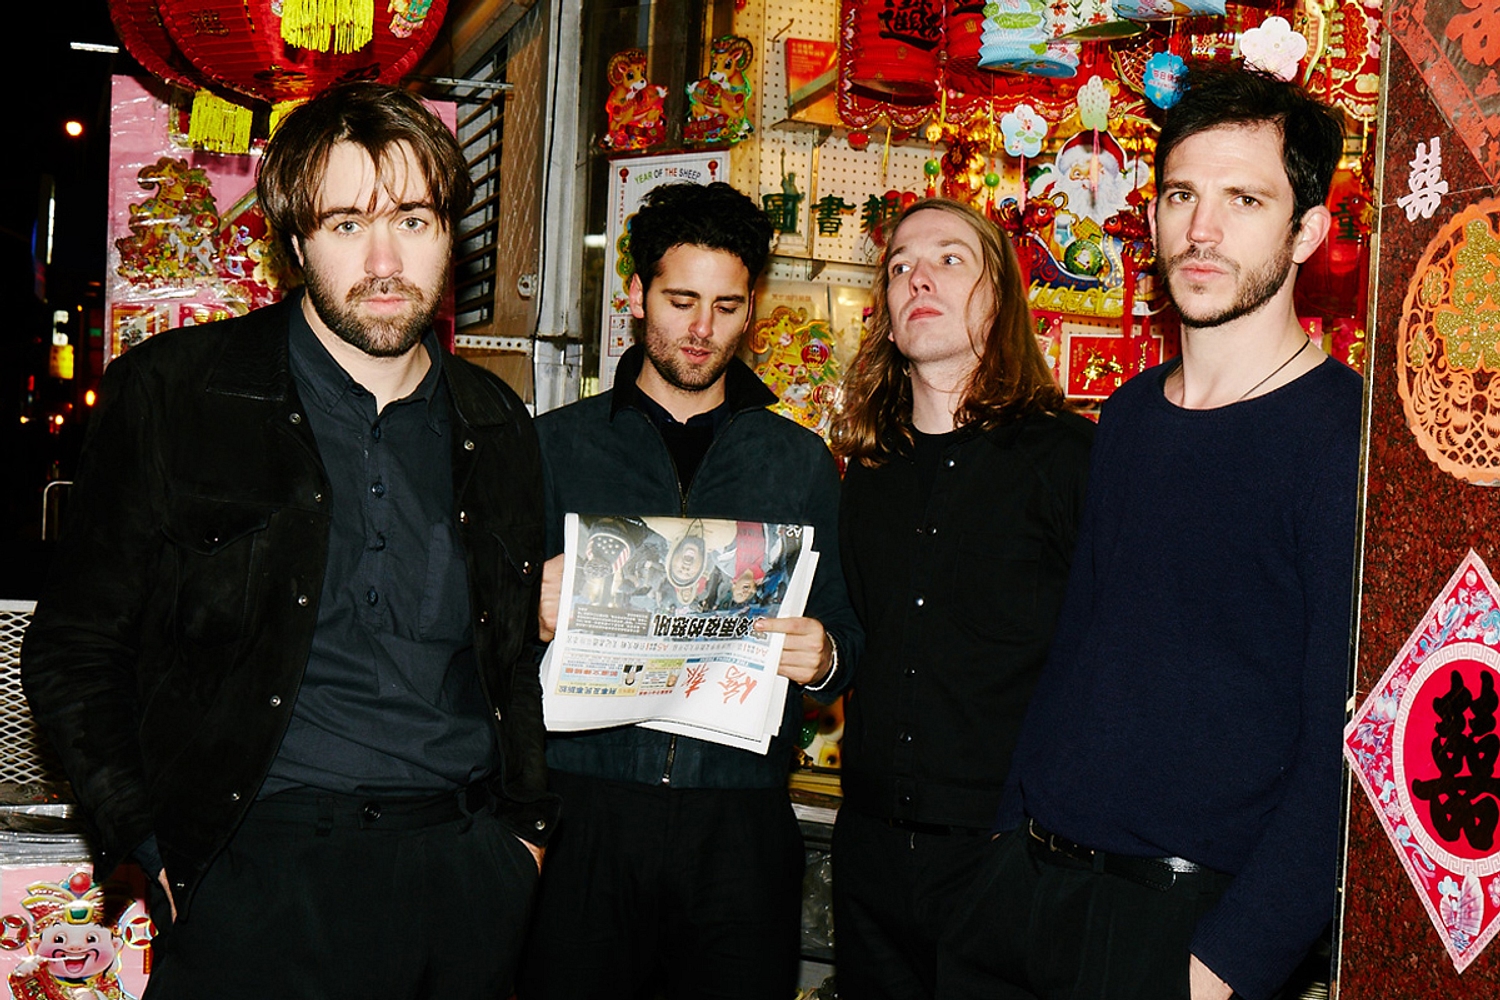 Edwyn Collins, The Vaccines to take part in Sound City 2015 conference